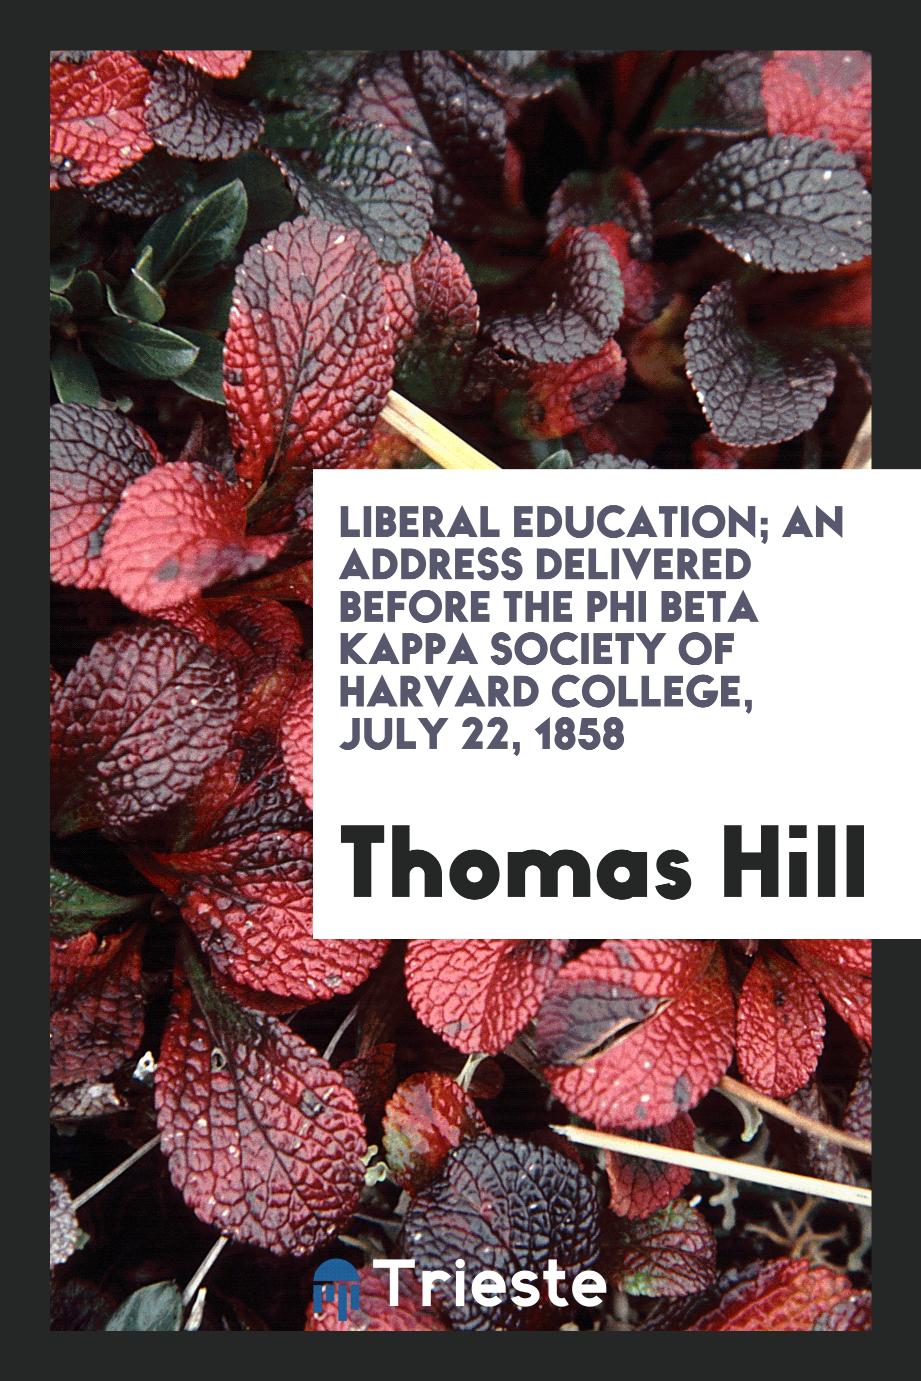 Liberal education; an address delivered before the Phi Beta Kappa Society of Harvard College, July 22, 1858